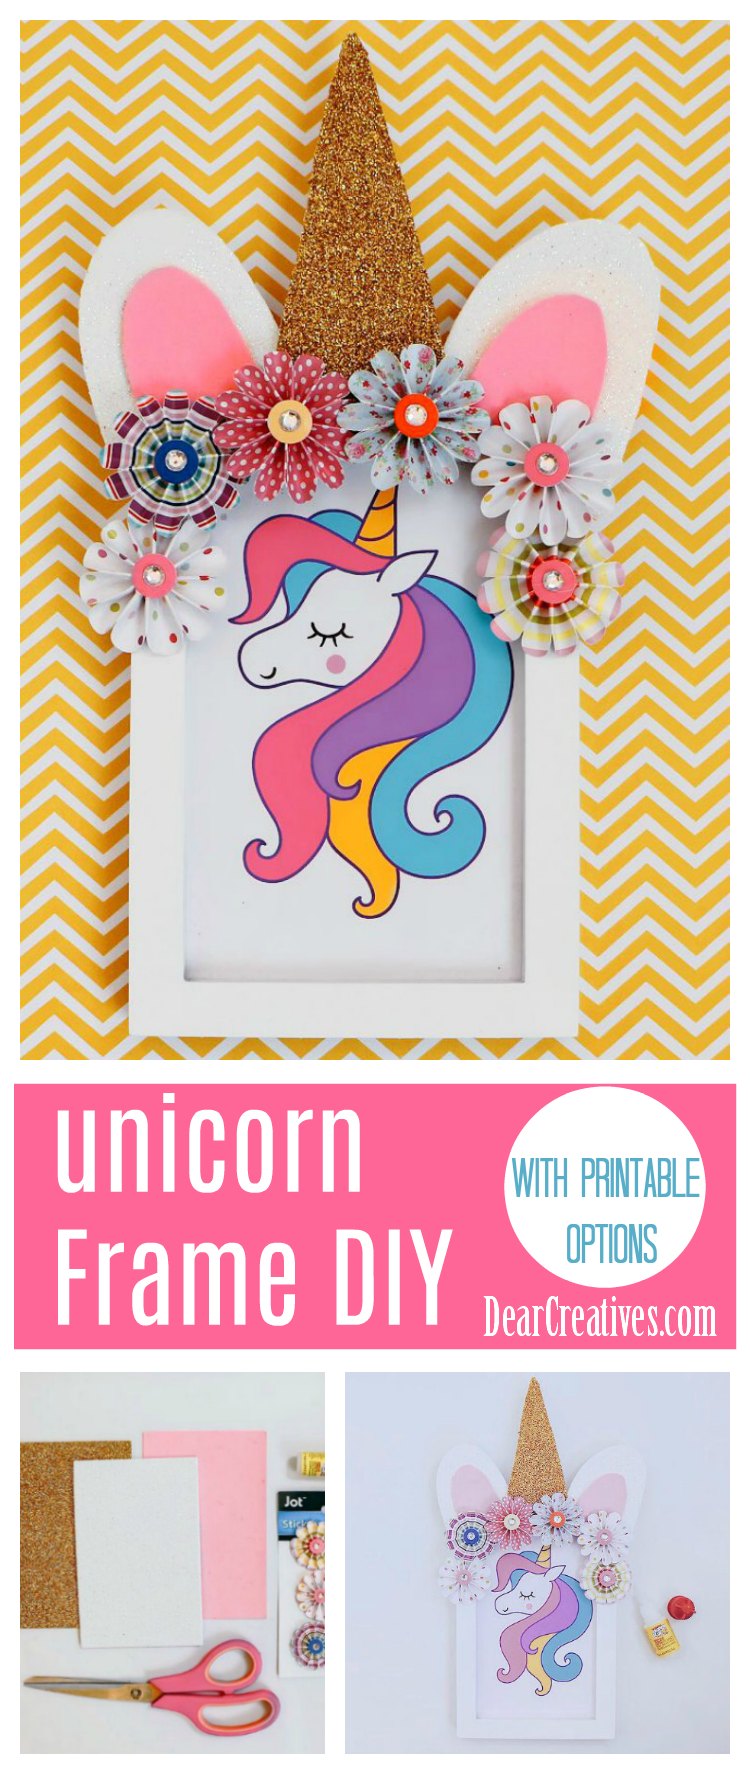 Unicorn Frame DIY is an easy unicorn crafts idea that is done with paper crafts, a frame, and a unicorn print. See how to make, and decorate. DearCreatives.com #unicornframecraft #unicorncrafts #easyunicorncrafts